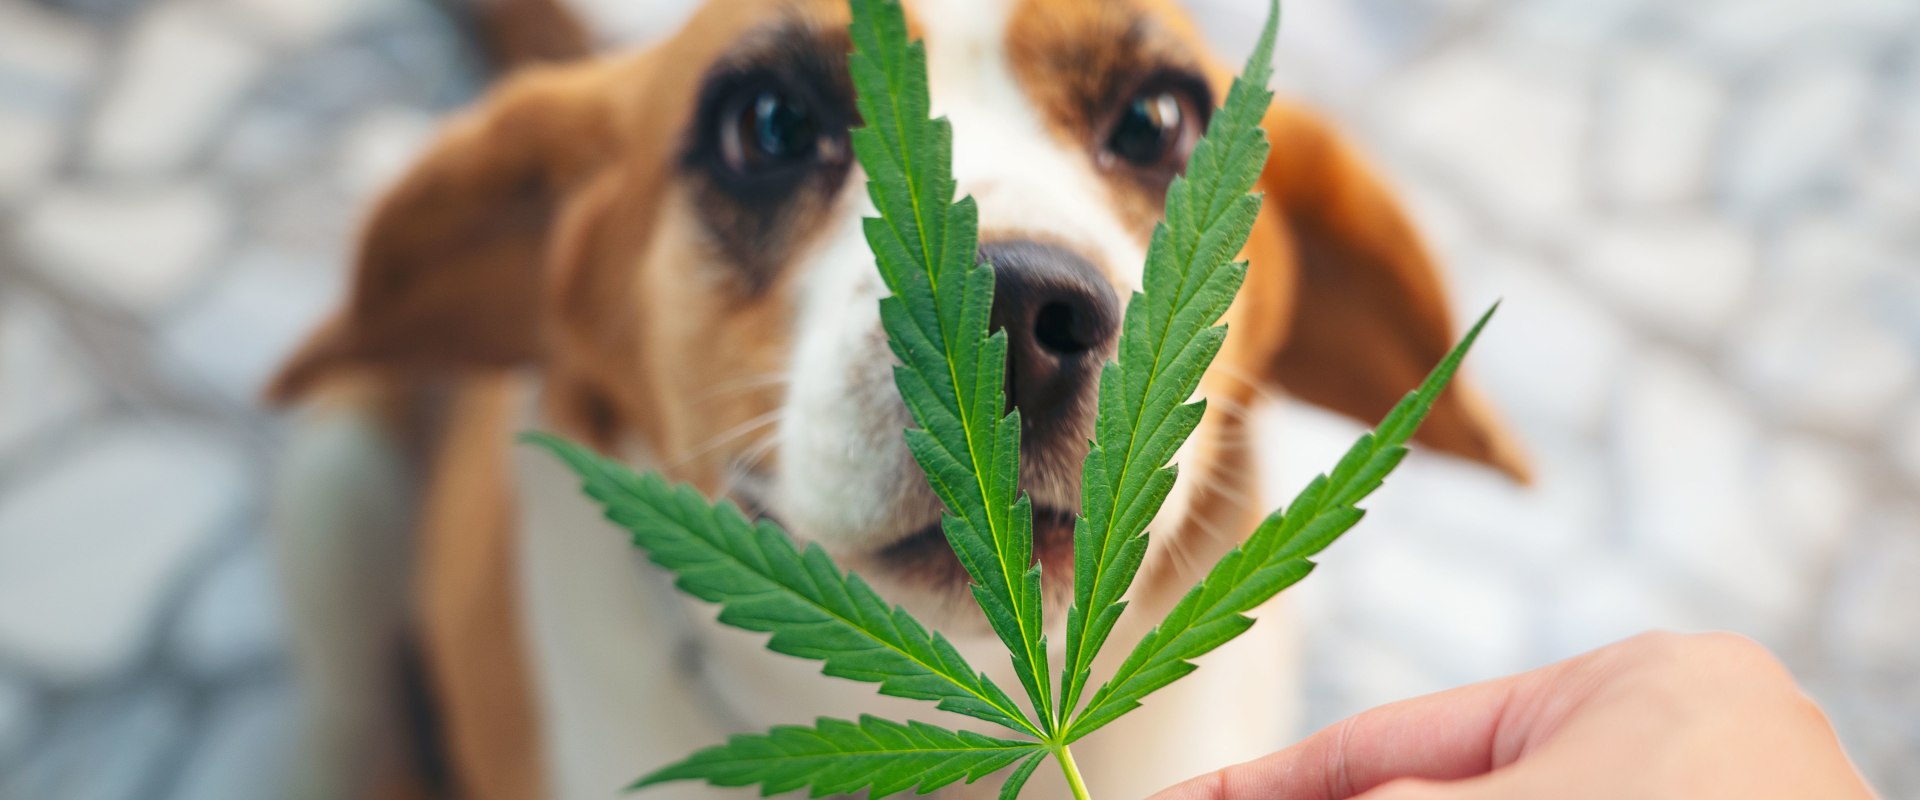 Can dogs have thc for pain?